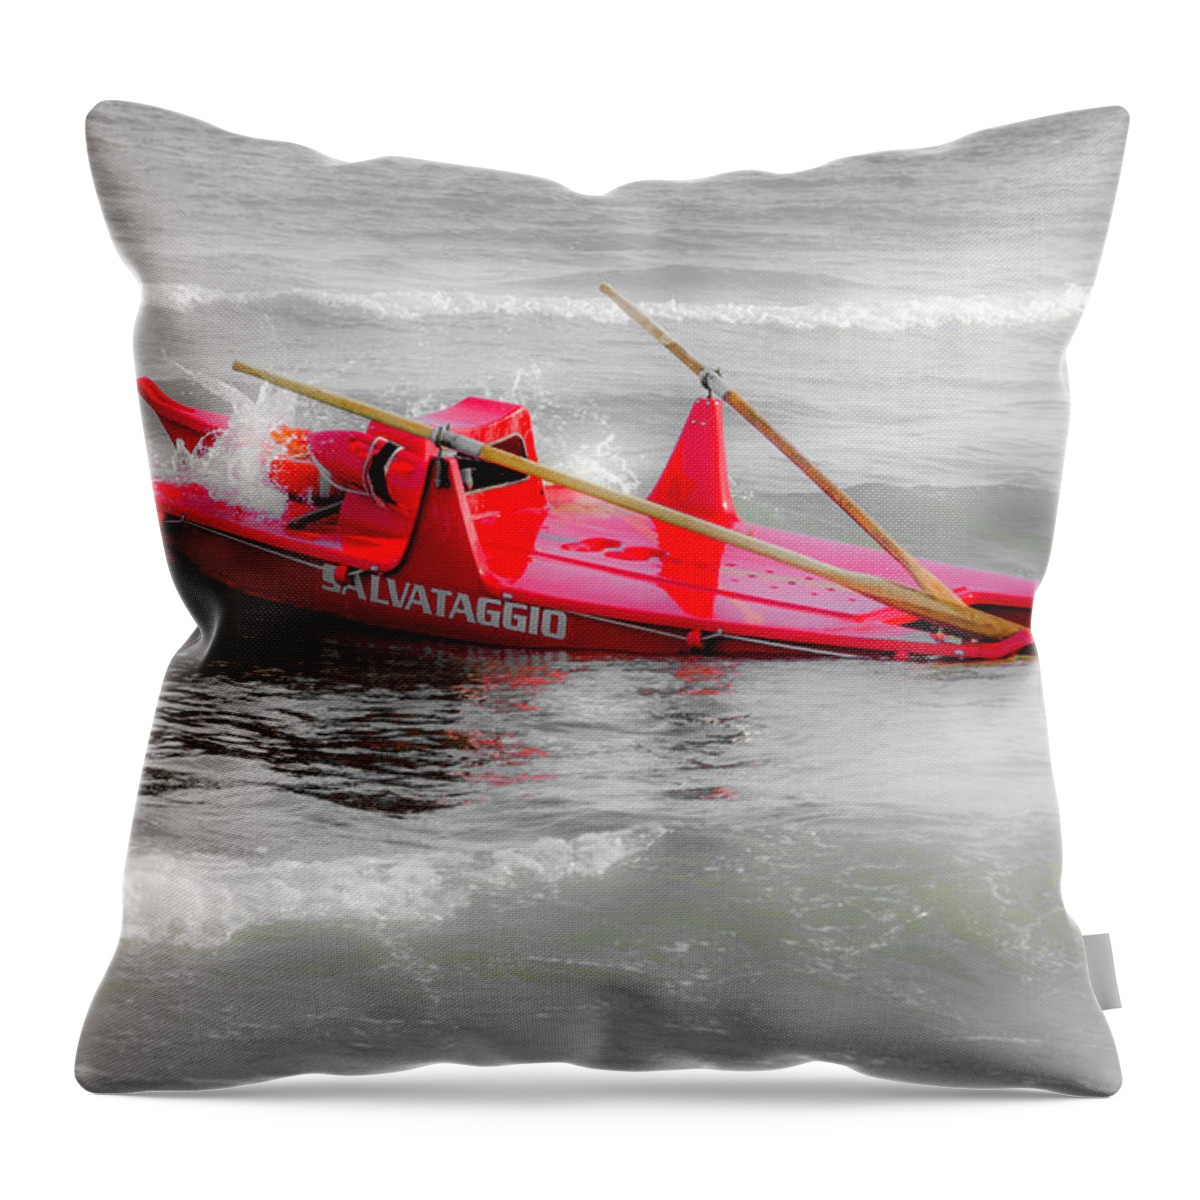 Salvataggio Throw Pillow featuring the photograph Italian life guard boat by Wolfgang Stocker